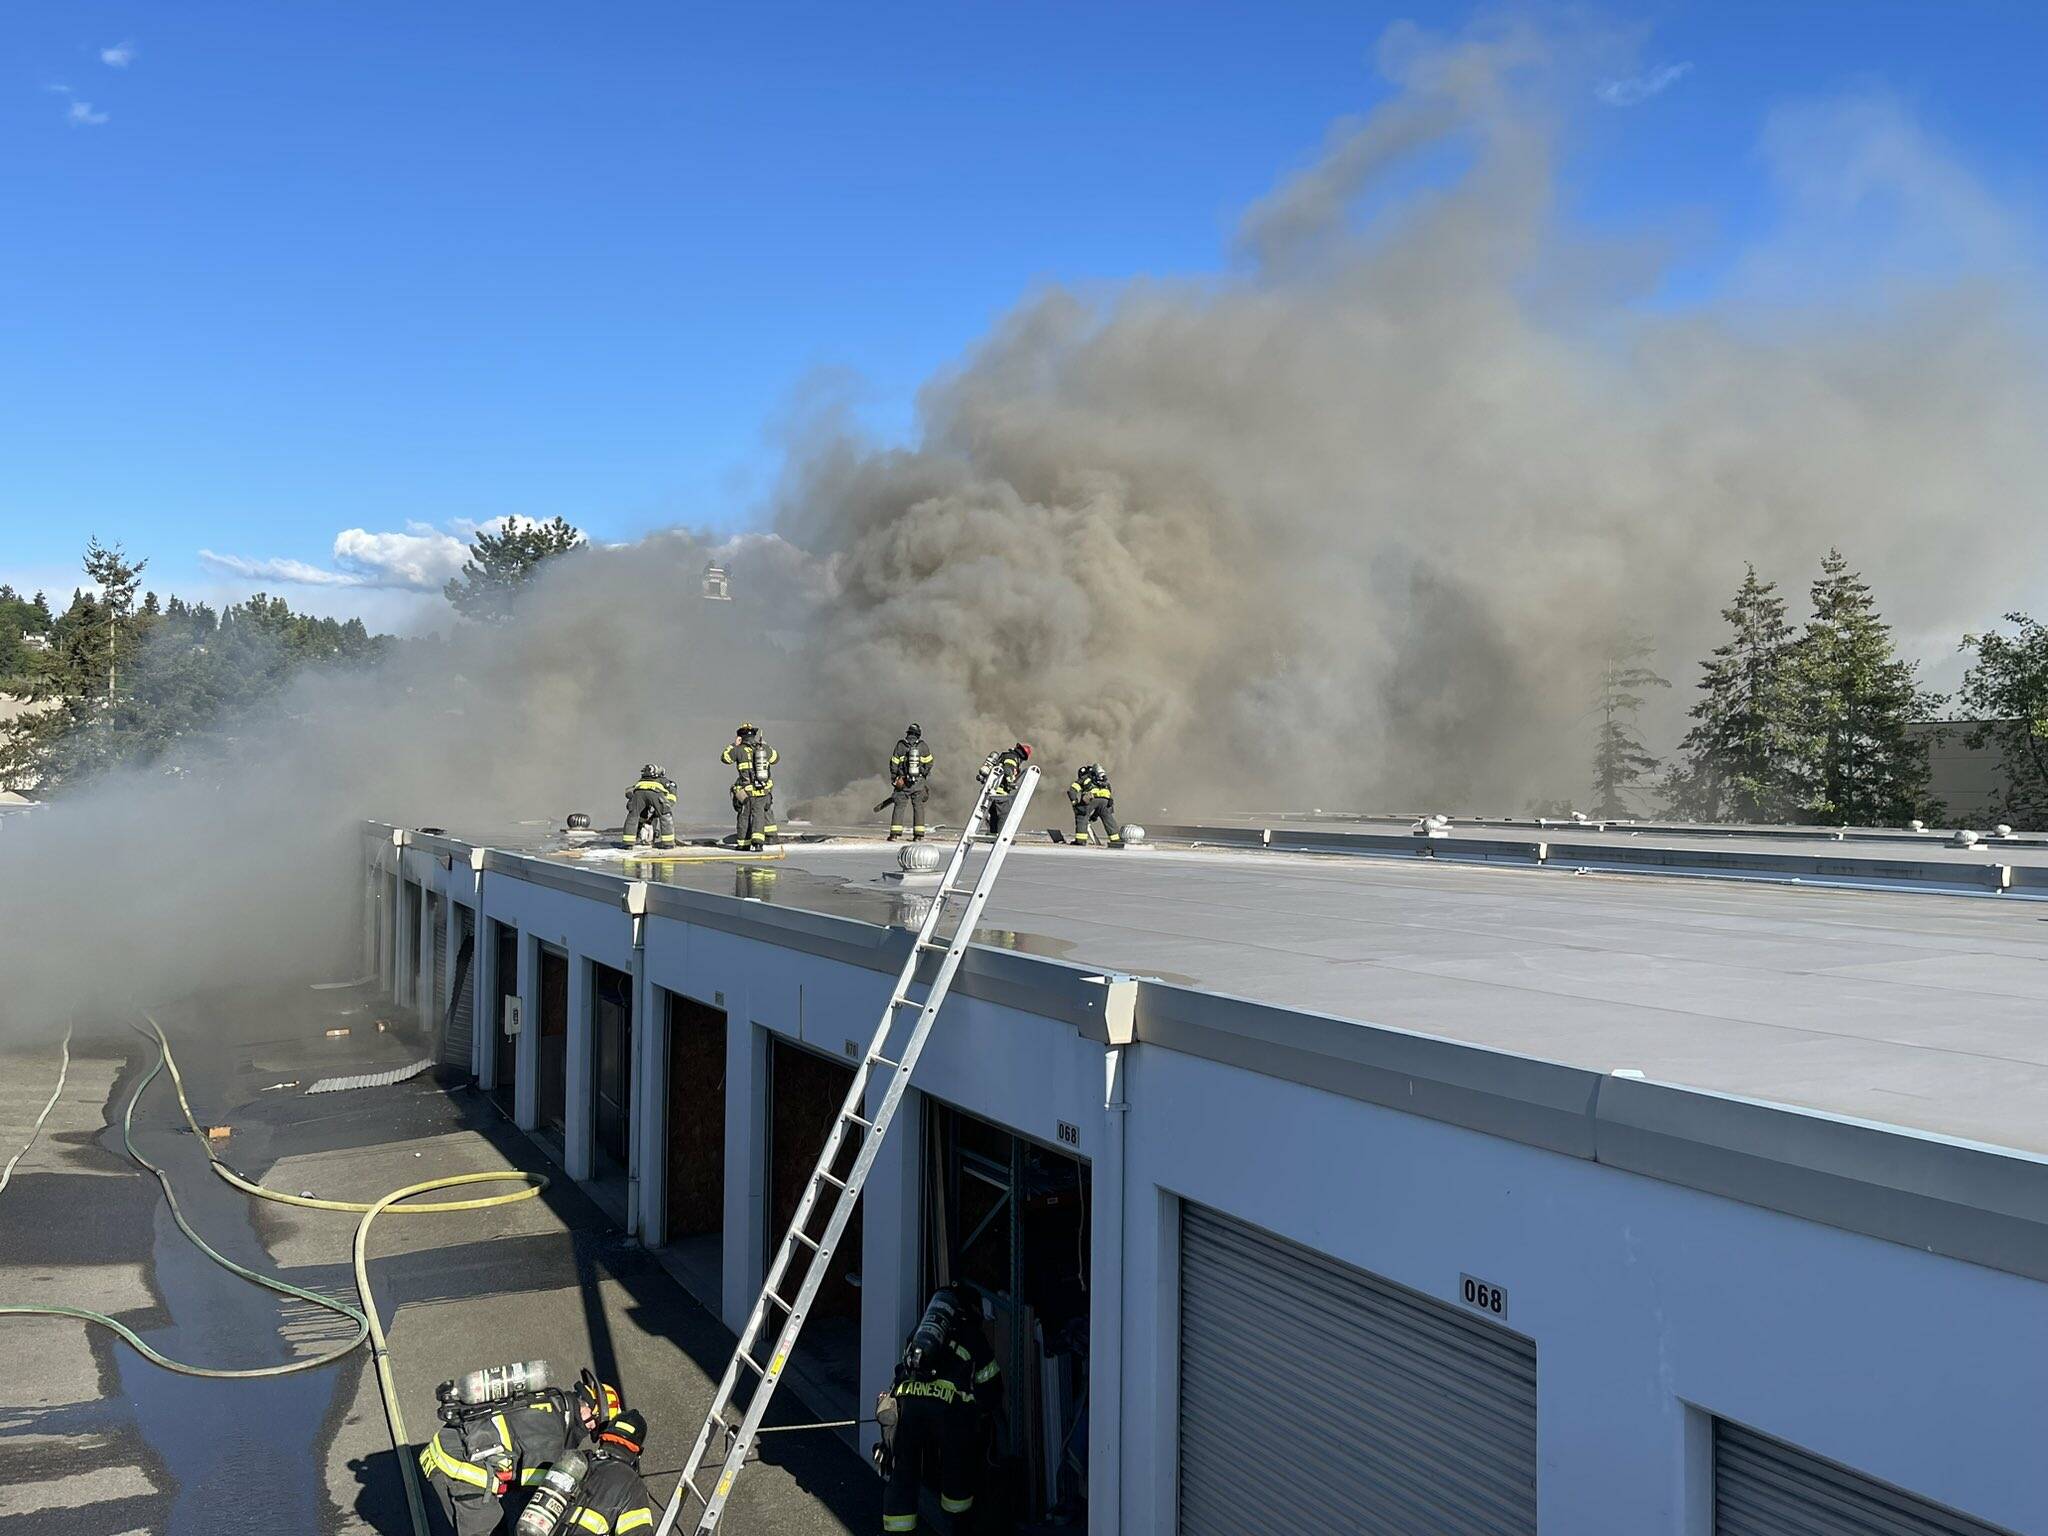 Firefighters from Puget Sound Fire and Renton Regional Fire Authority were able to extinguish the fire within an hour of arriving to the scene. Courtesy image.